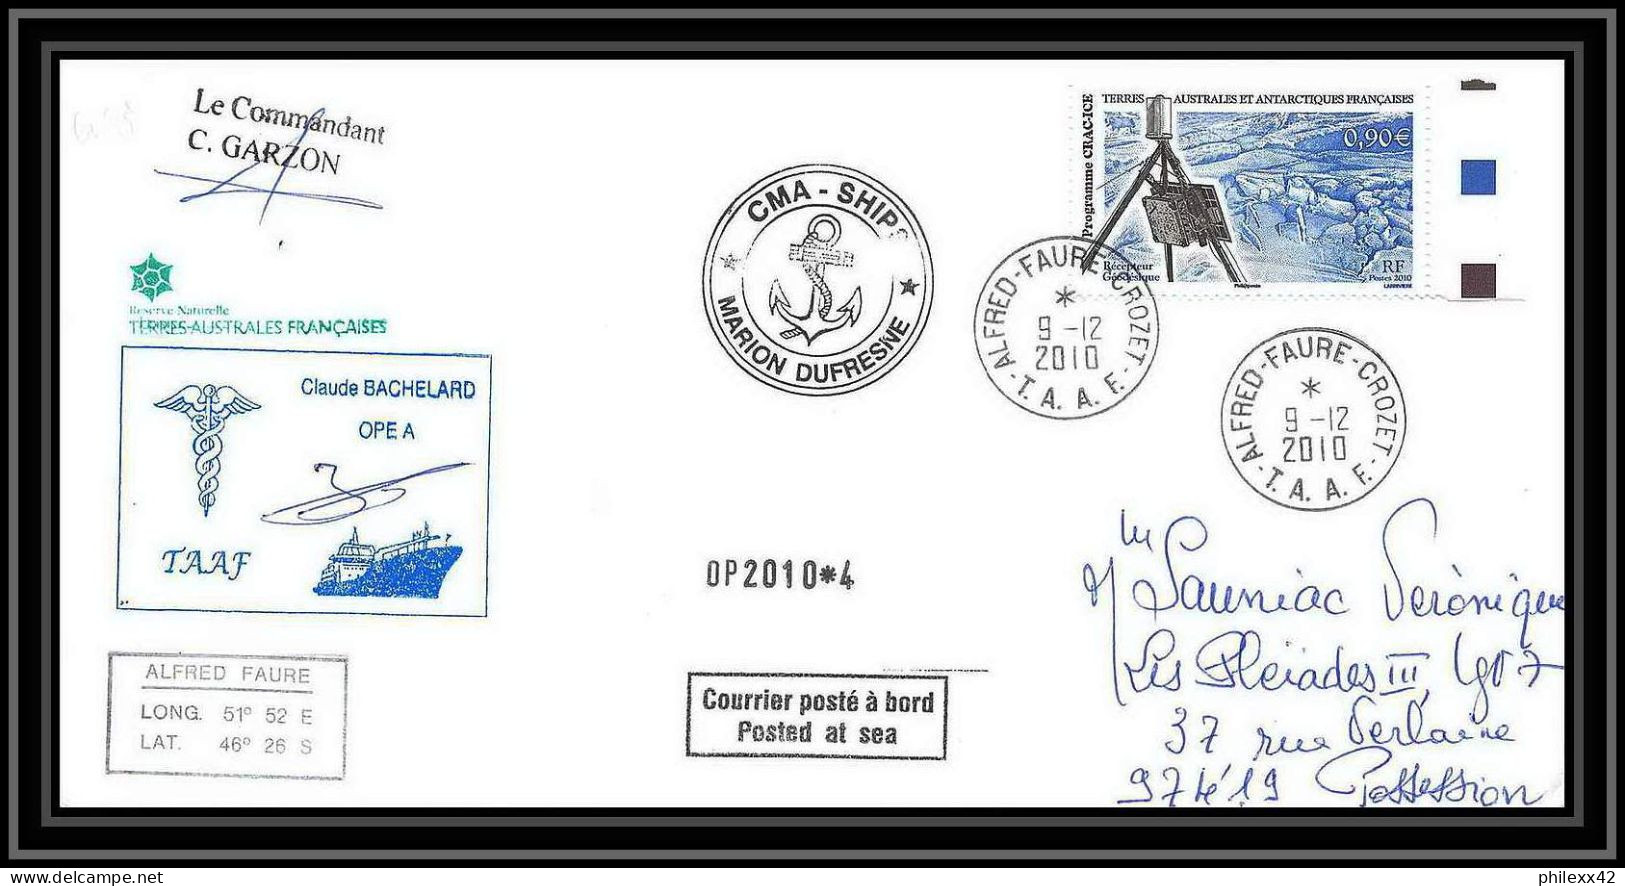 3054 Helilagon Dufresne Signé Signed Op 2010/4 Crozet 9/12/2010 N°559 ANTARCTIC Terres Australes (taaf) Lettre Cover - Helicopters